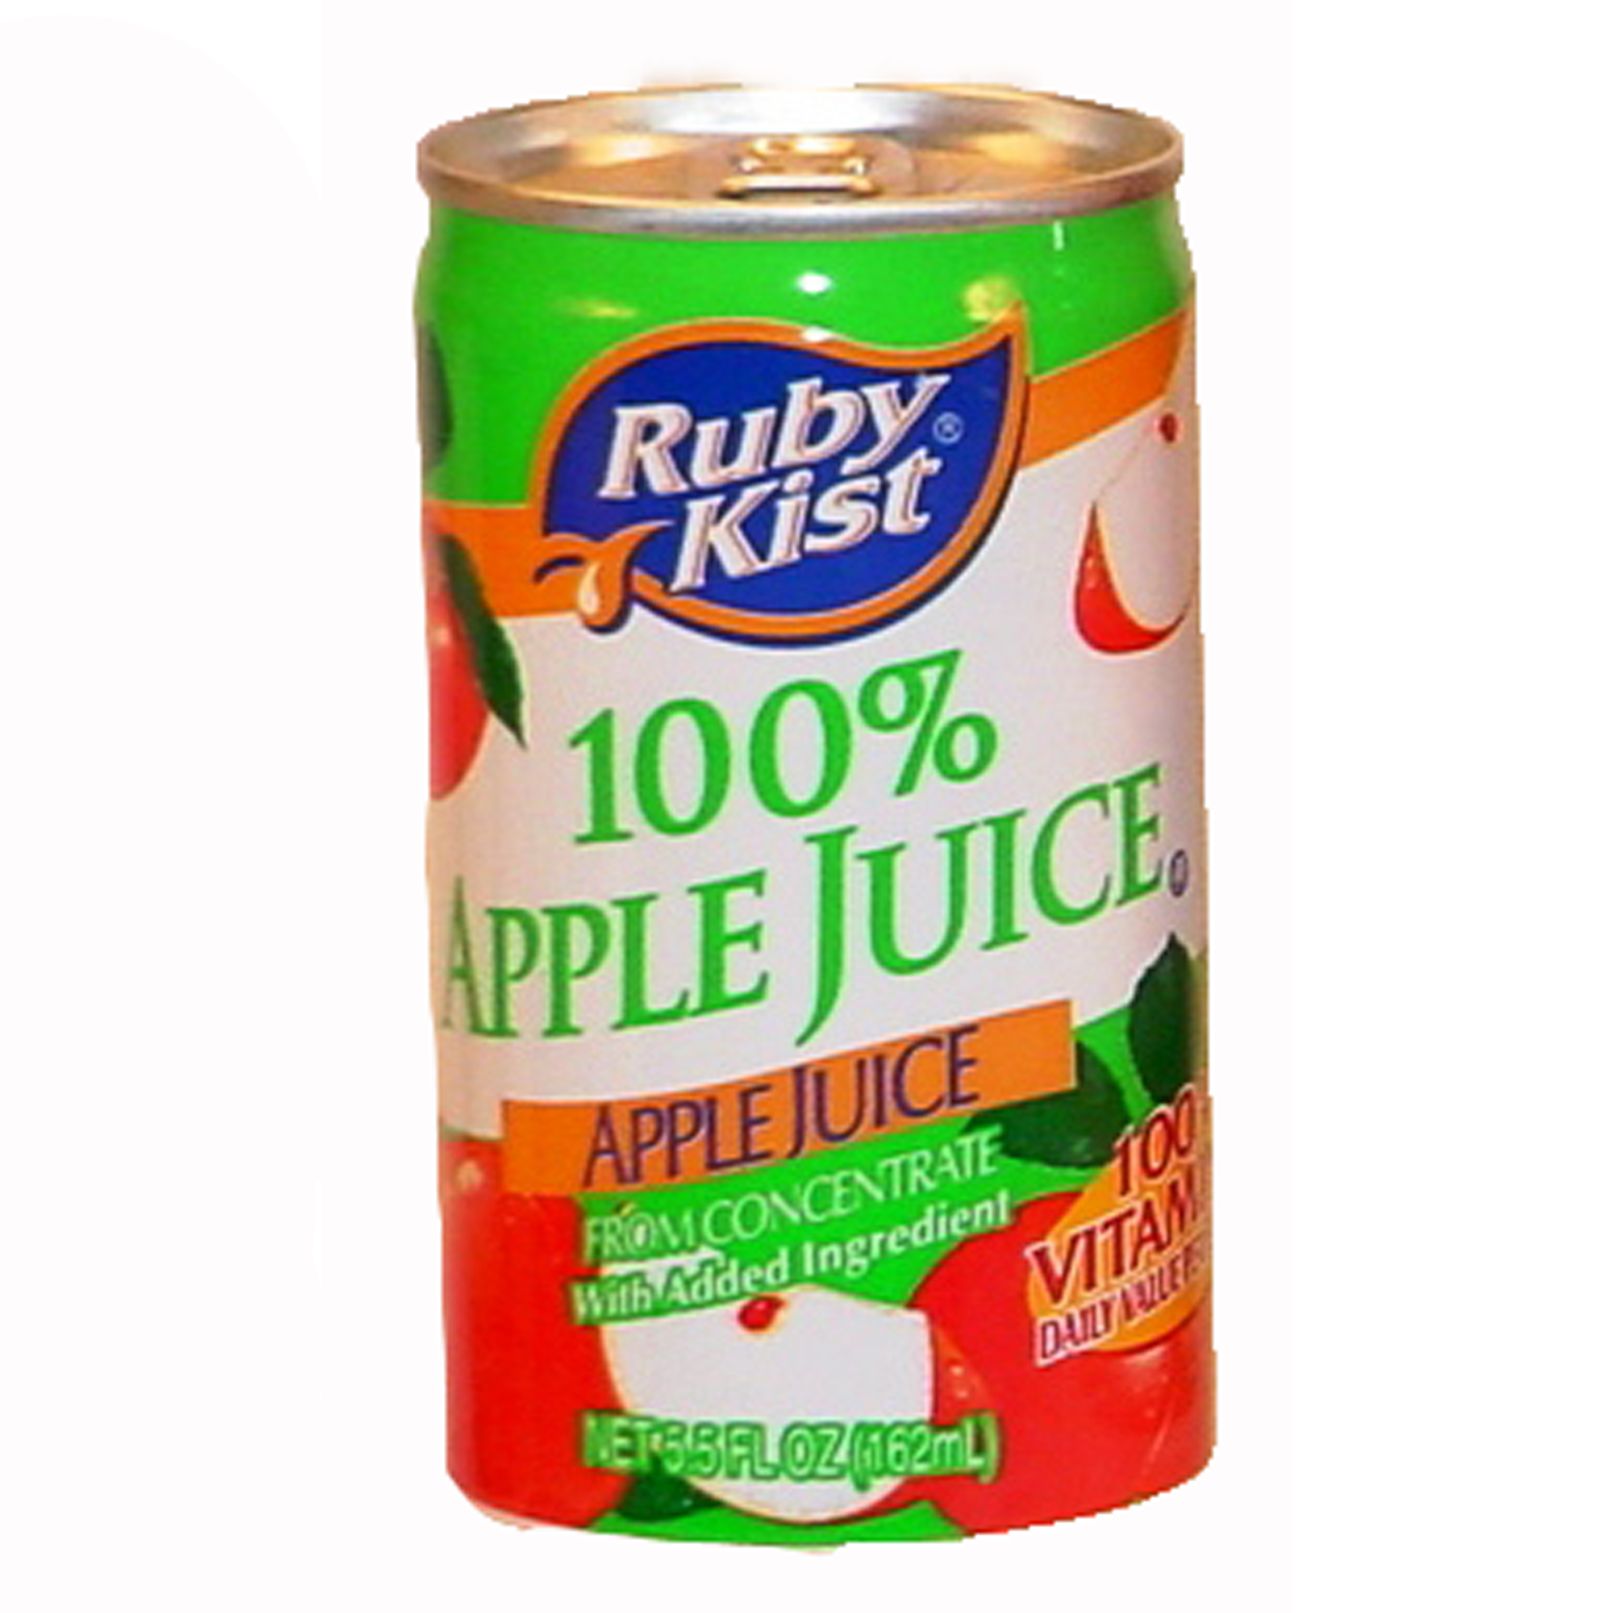 Juice Apple 100% 48/5.5oz Ruby Kiss - Sold by PACK